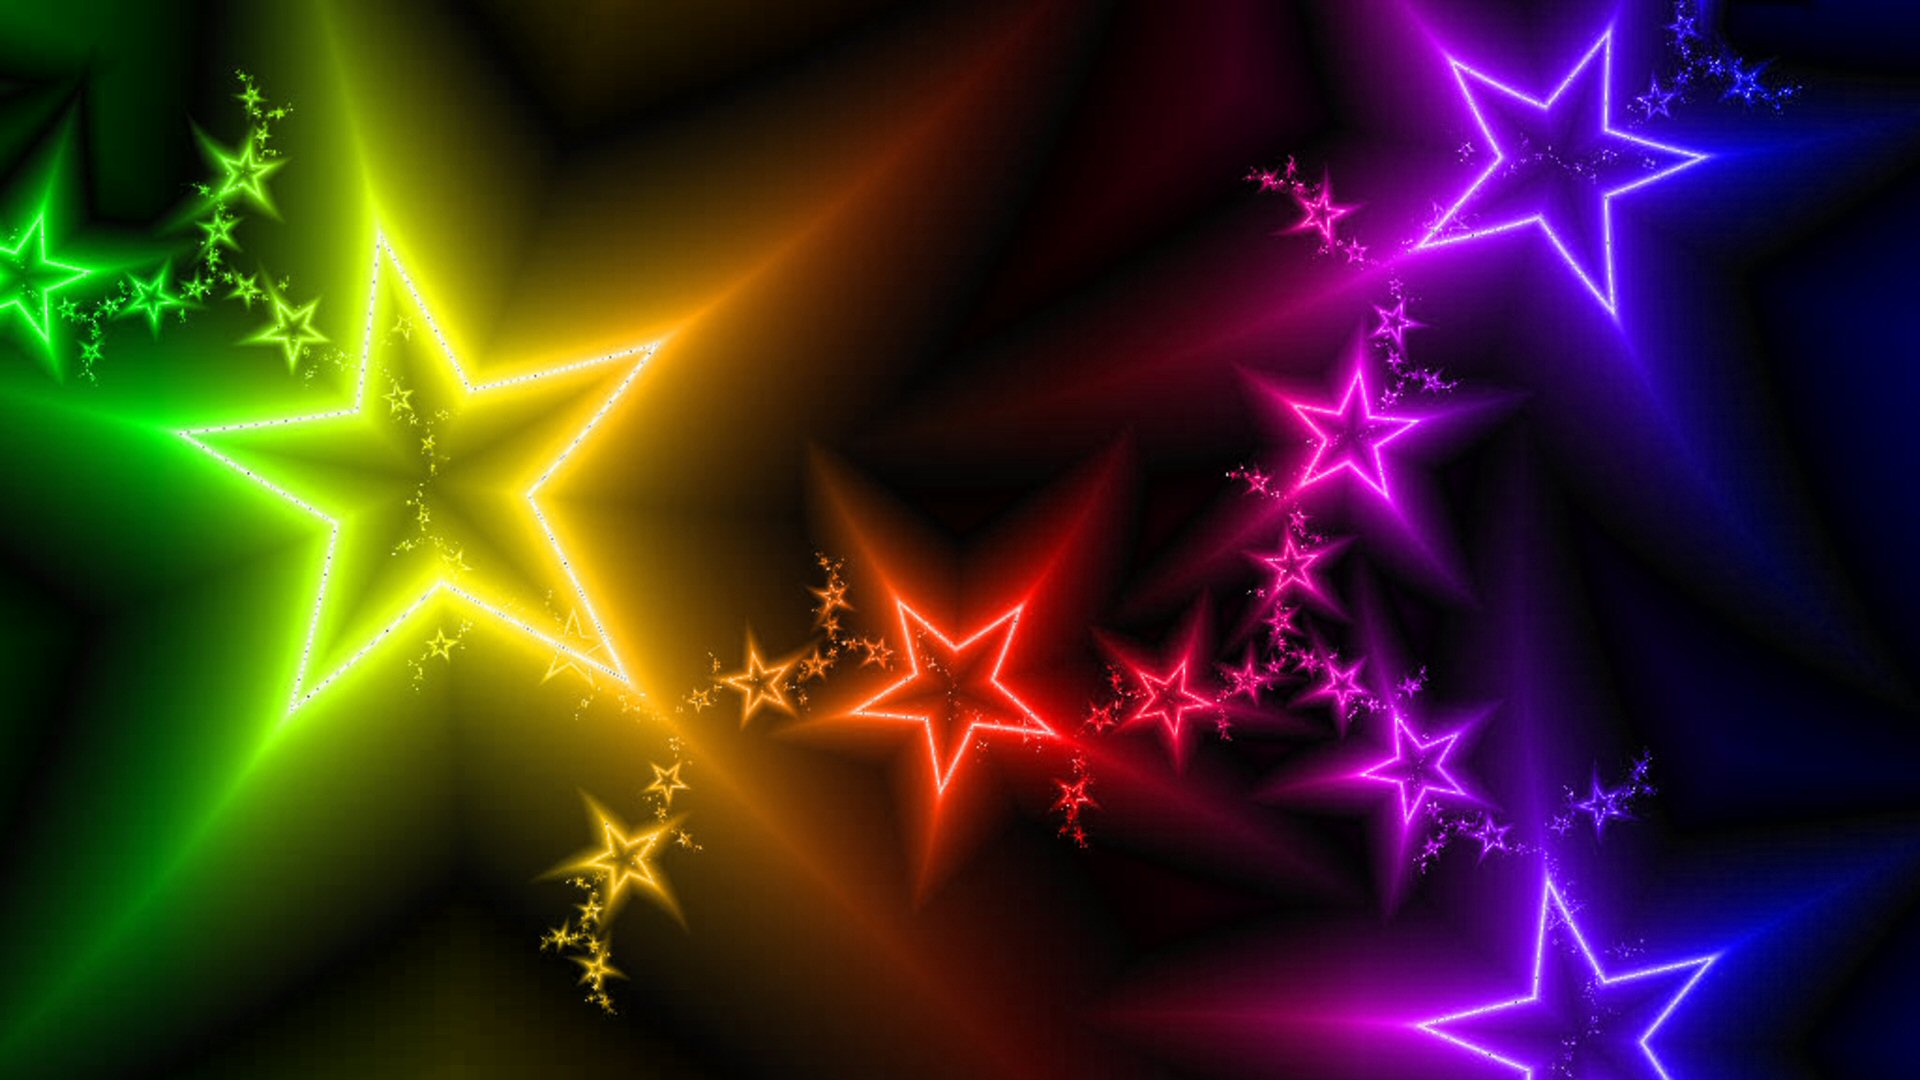 stars rainbows 1024x768 pixel PPT Backgrounds for Powerpoint Animation